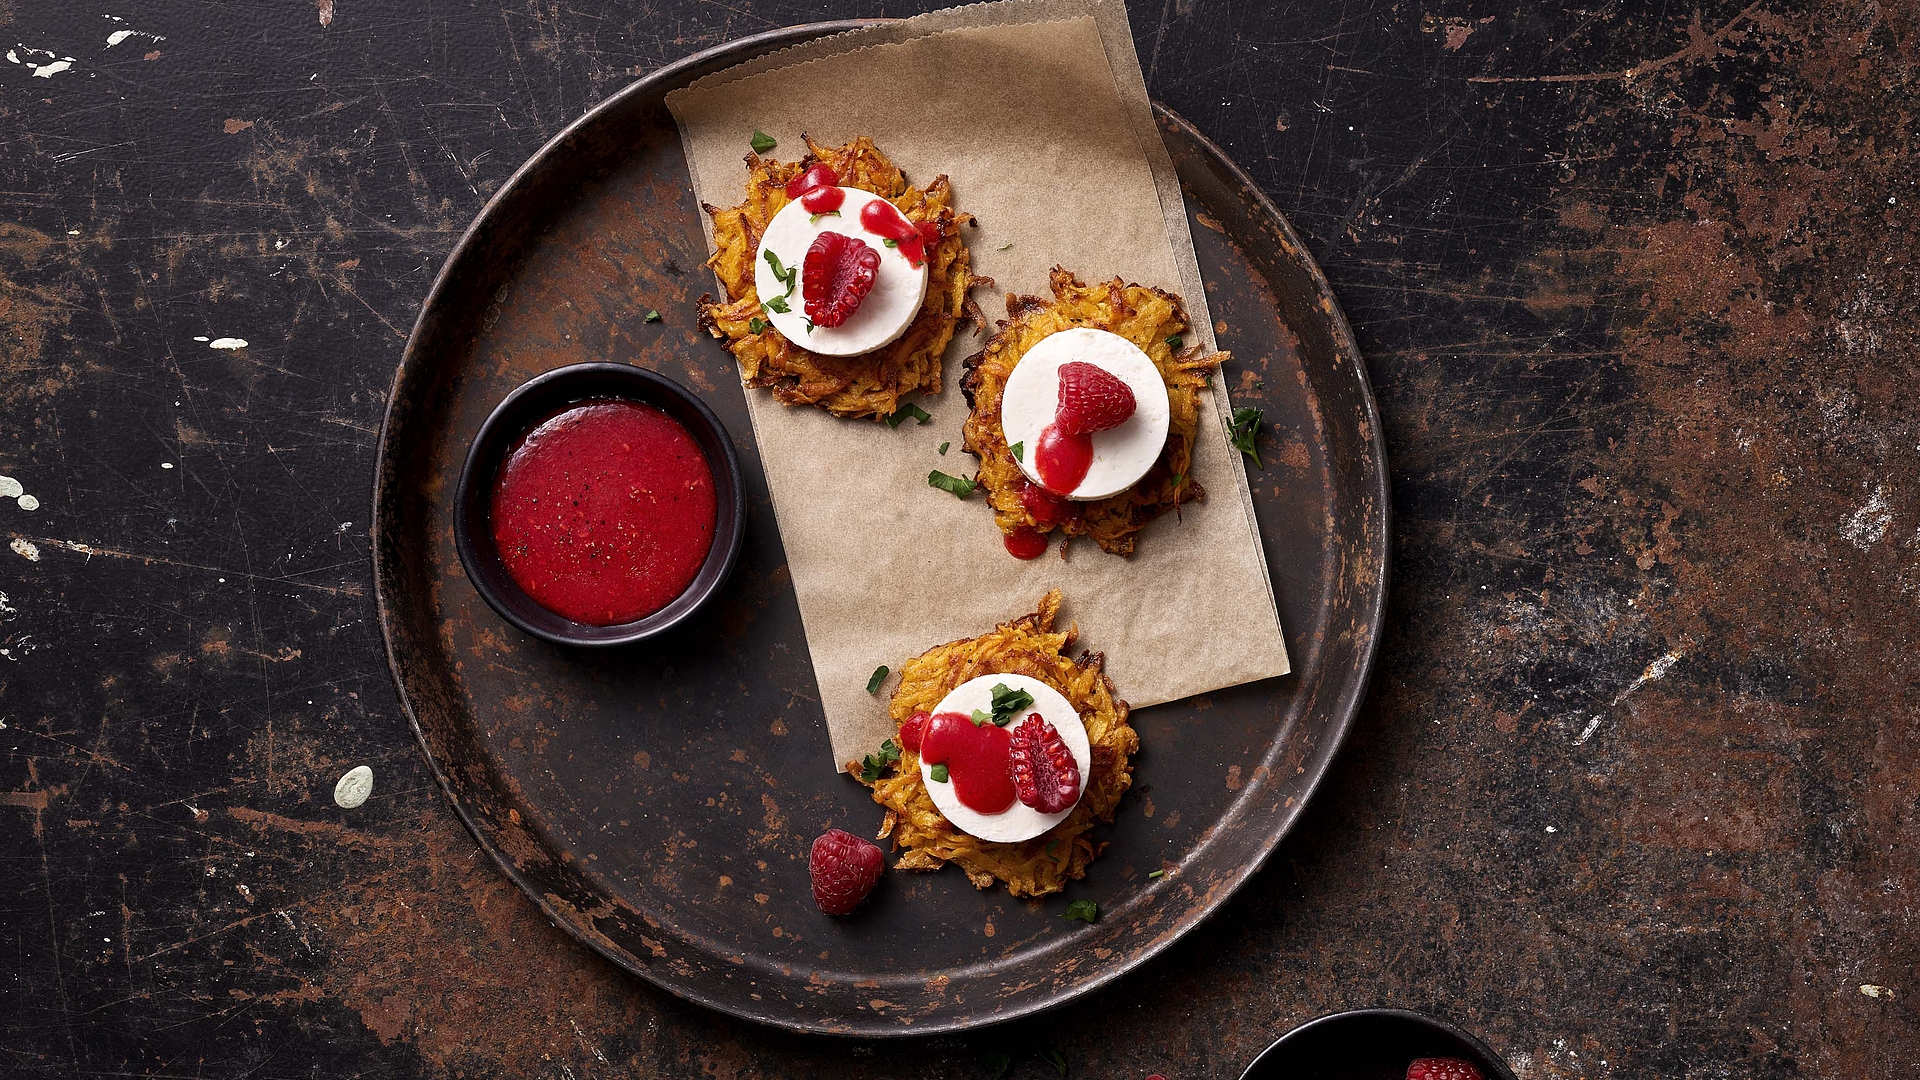 Sweet potato hash browns with feta and a raspberry dressing